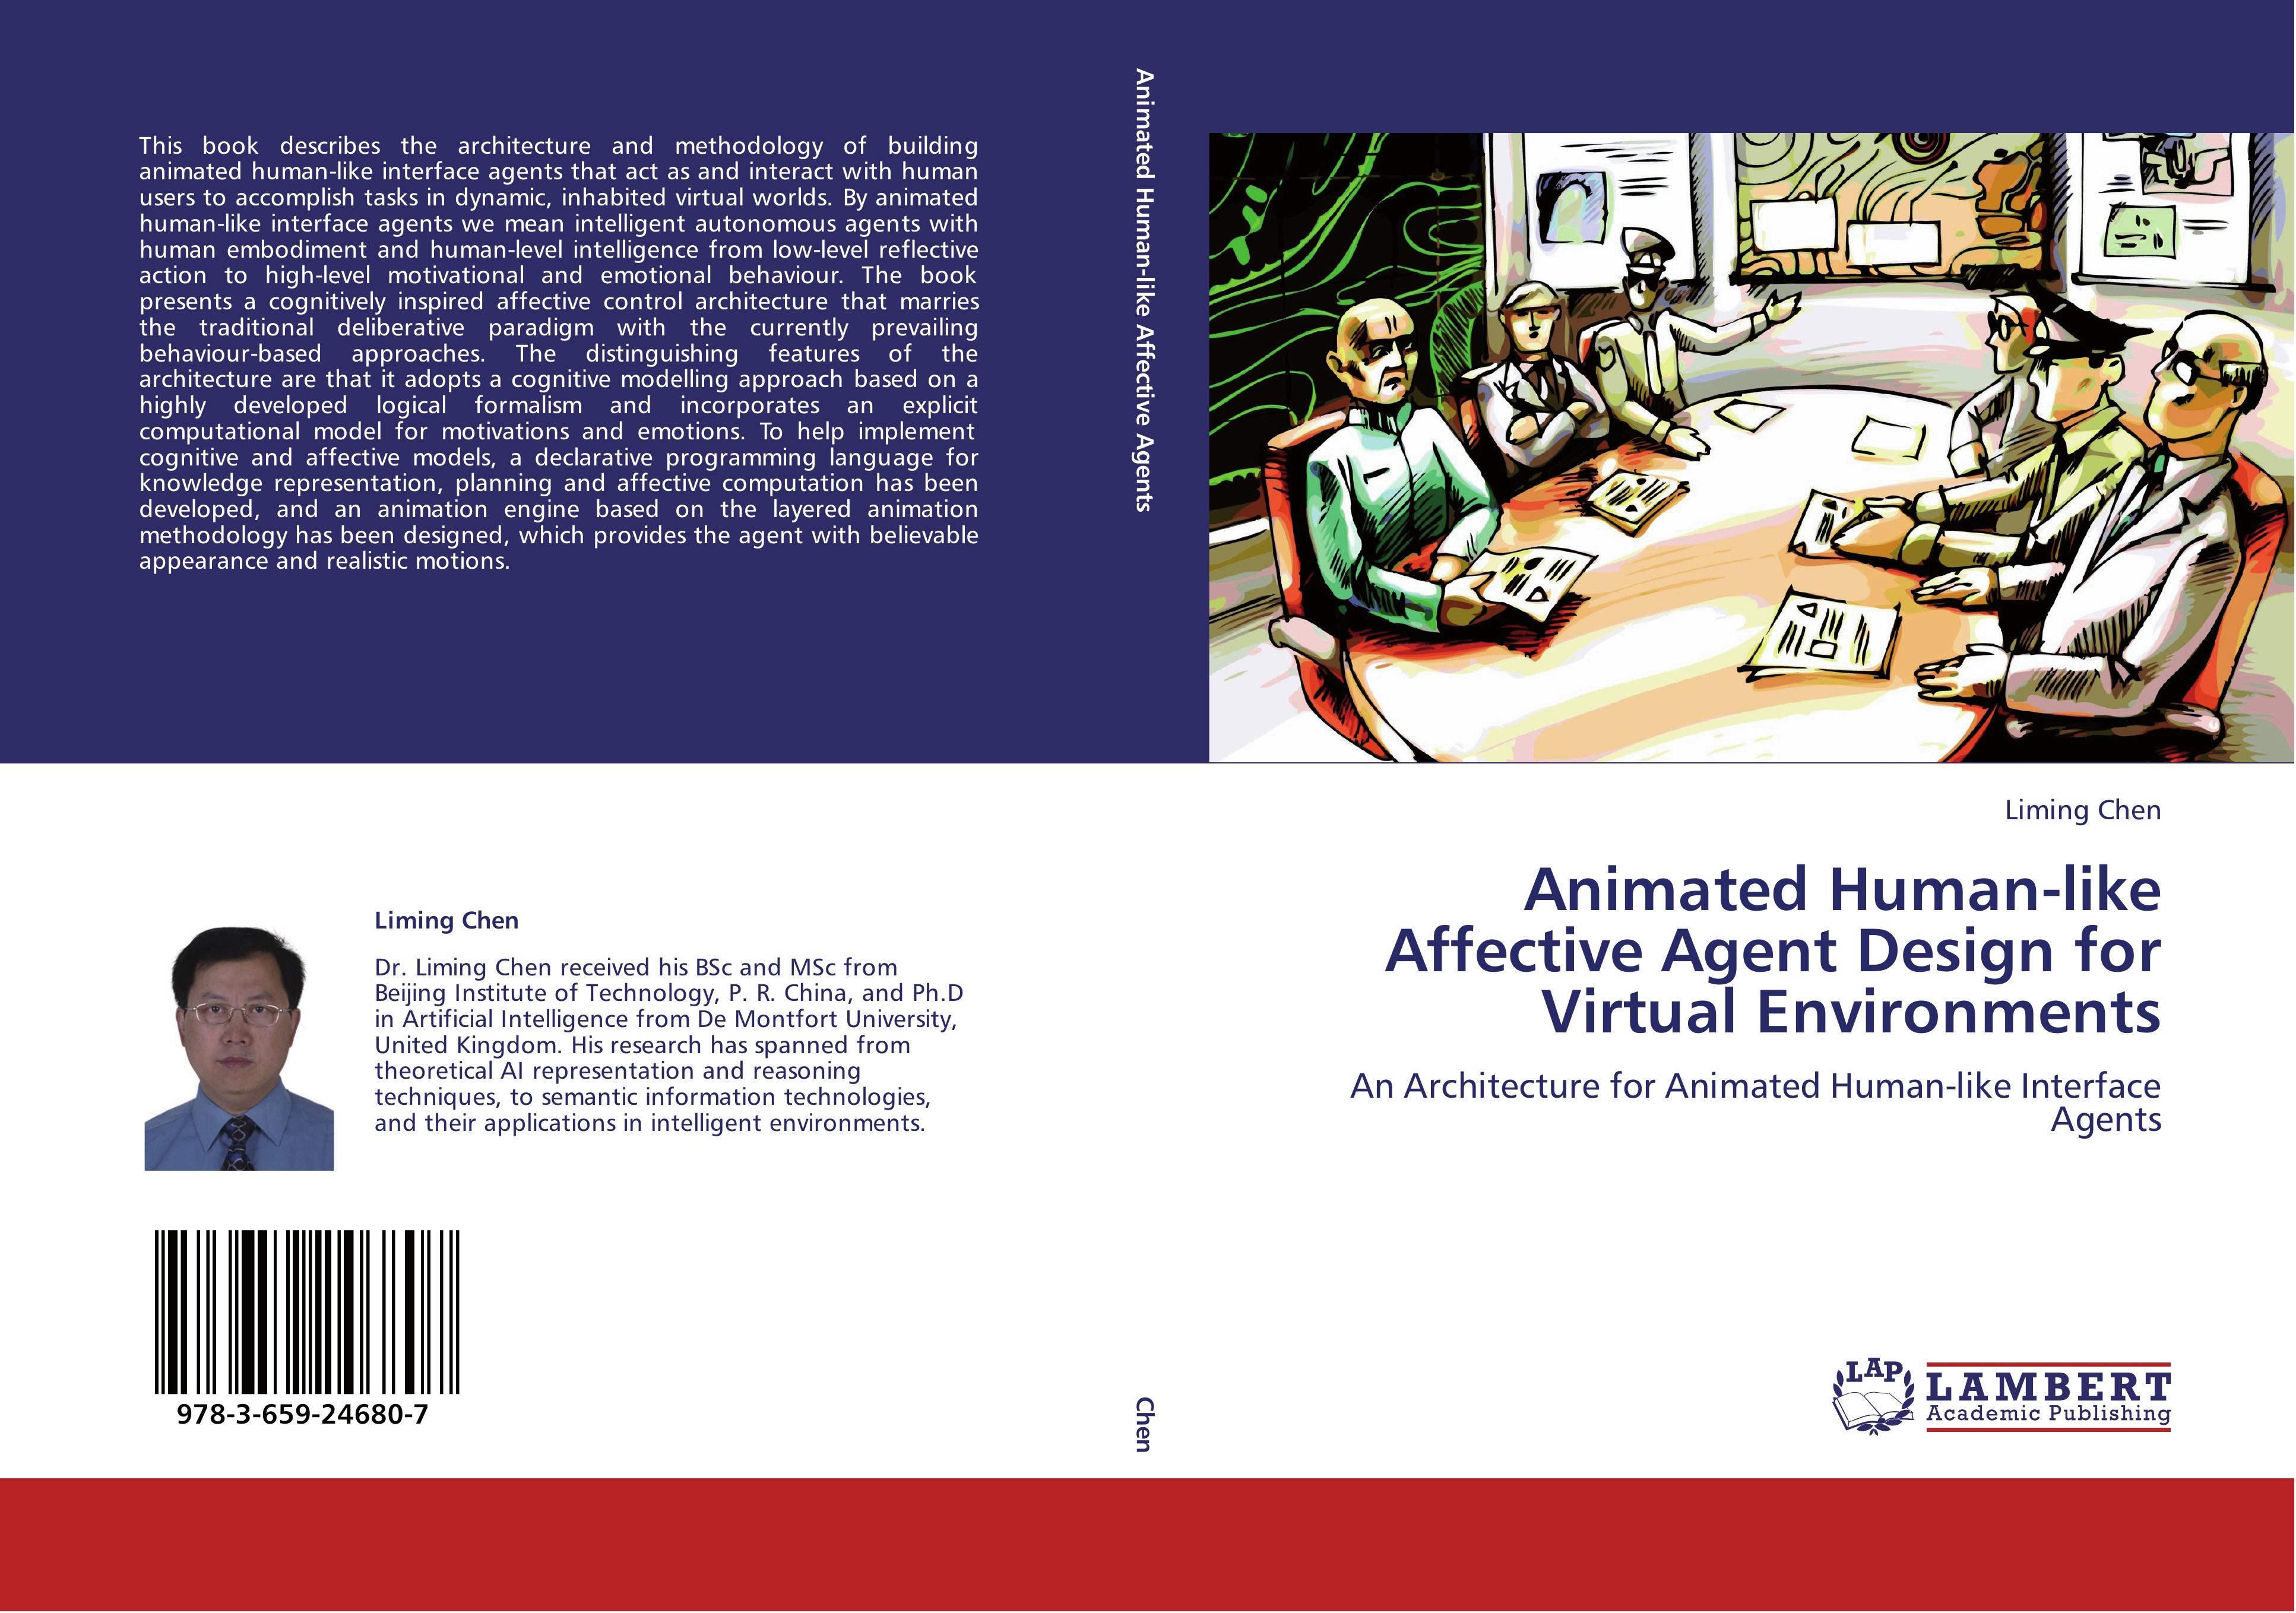 Animated Human-like Affective Agent Design for Virtual Environments - Liming Chen